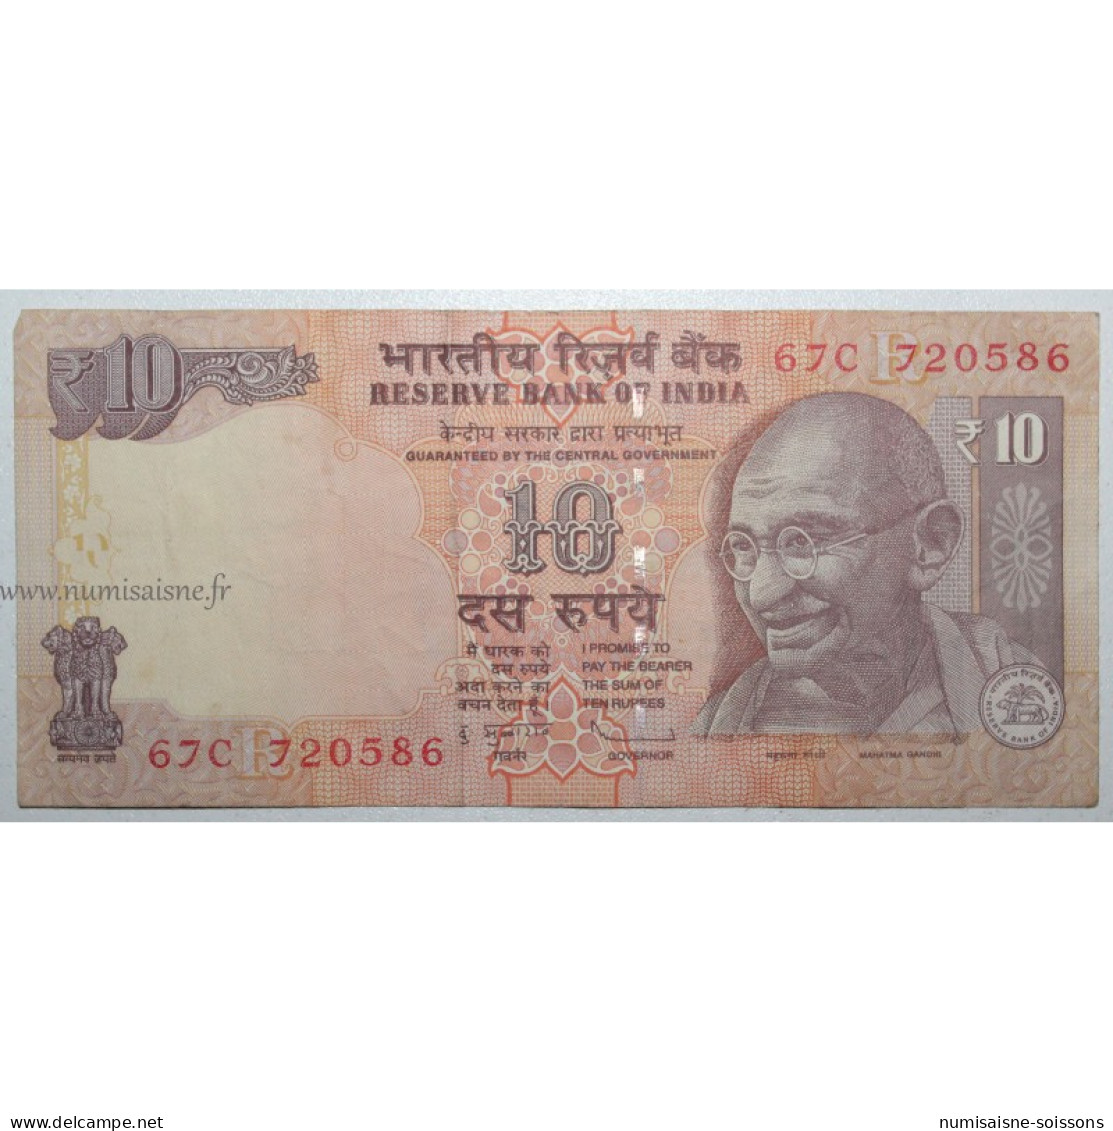 INDE - PICK 89 A - 10 RUPEES - NON DATE (1996) - TB - Indien